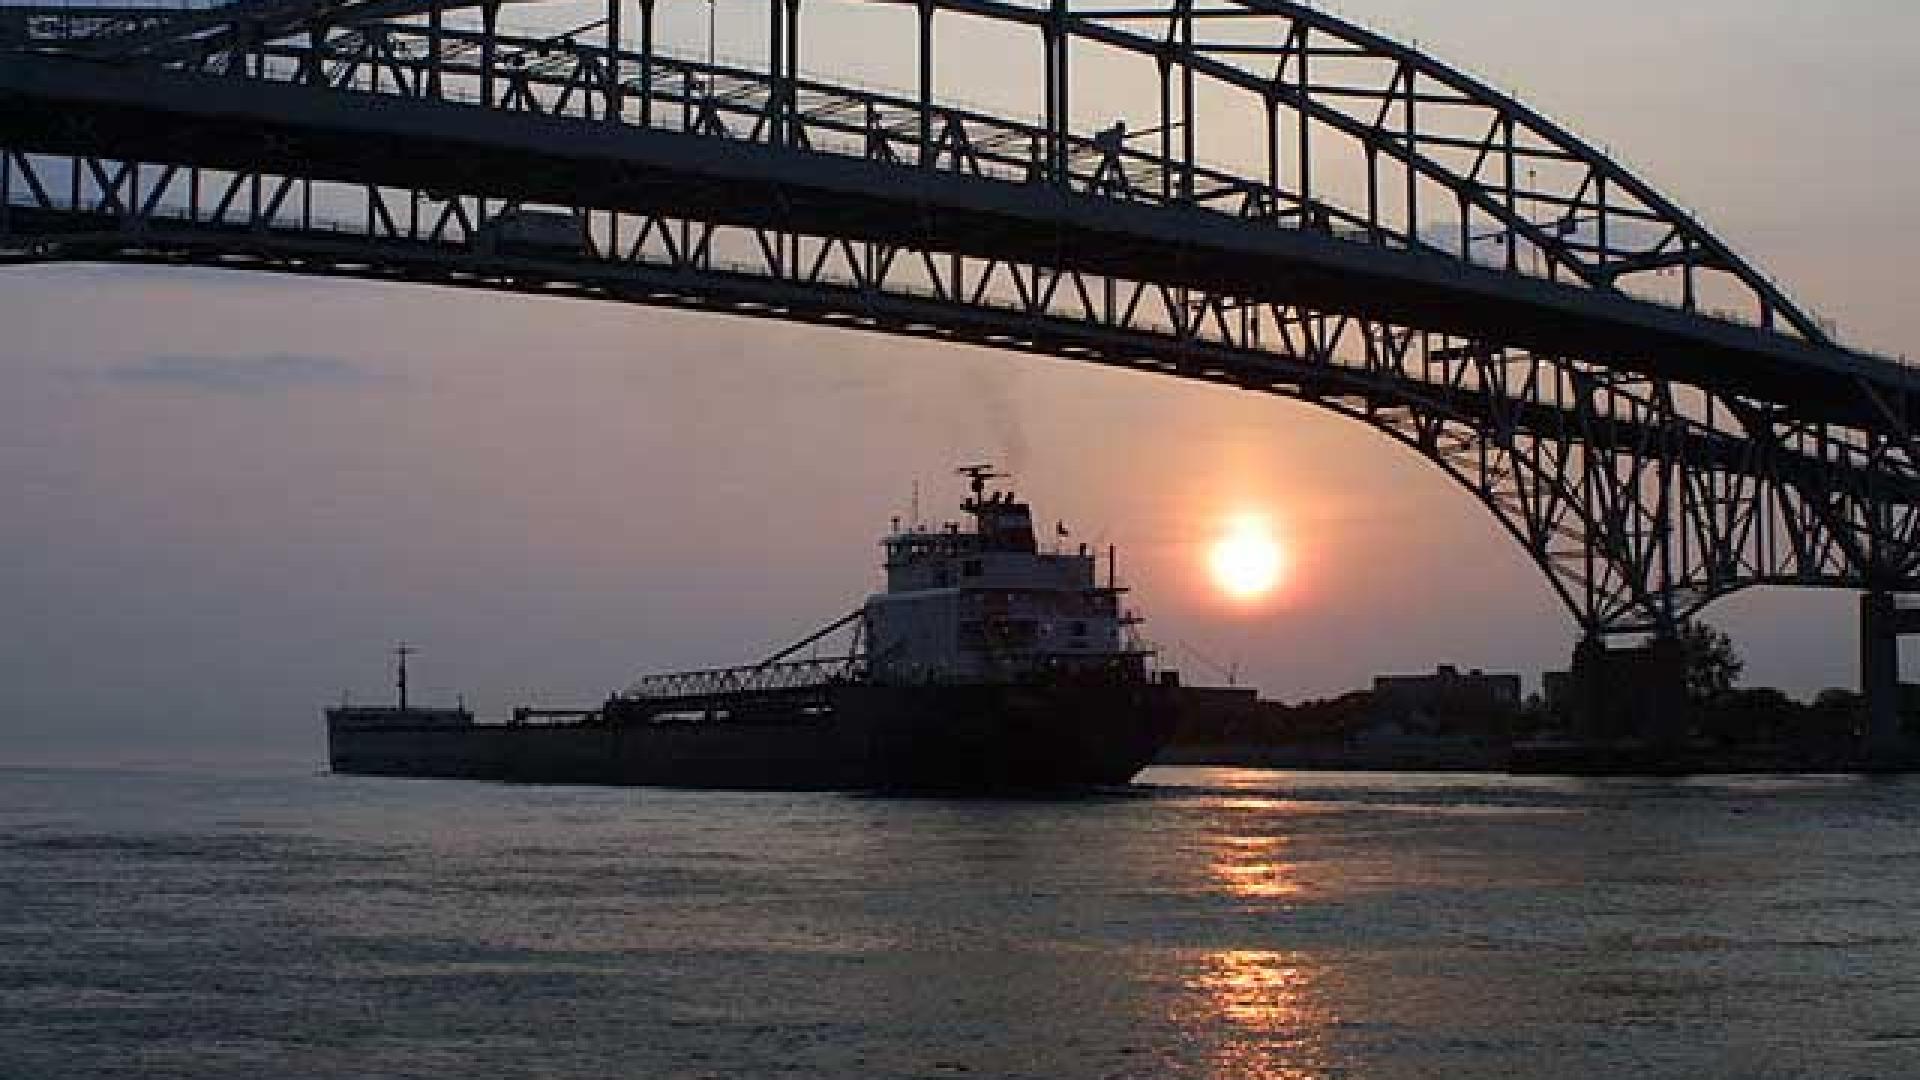 Silhouette of bridge standing tall in the foreground. In the background, the sun is glowing orange.